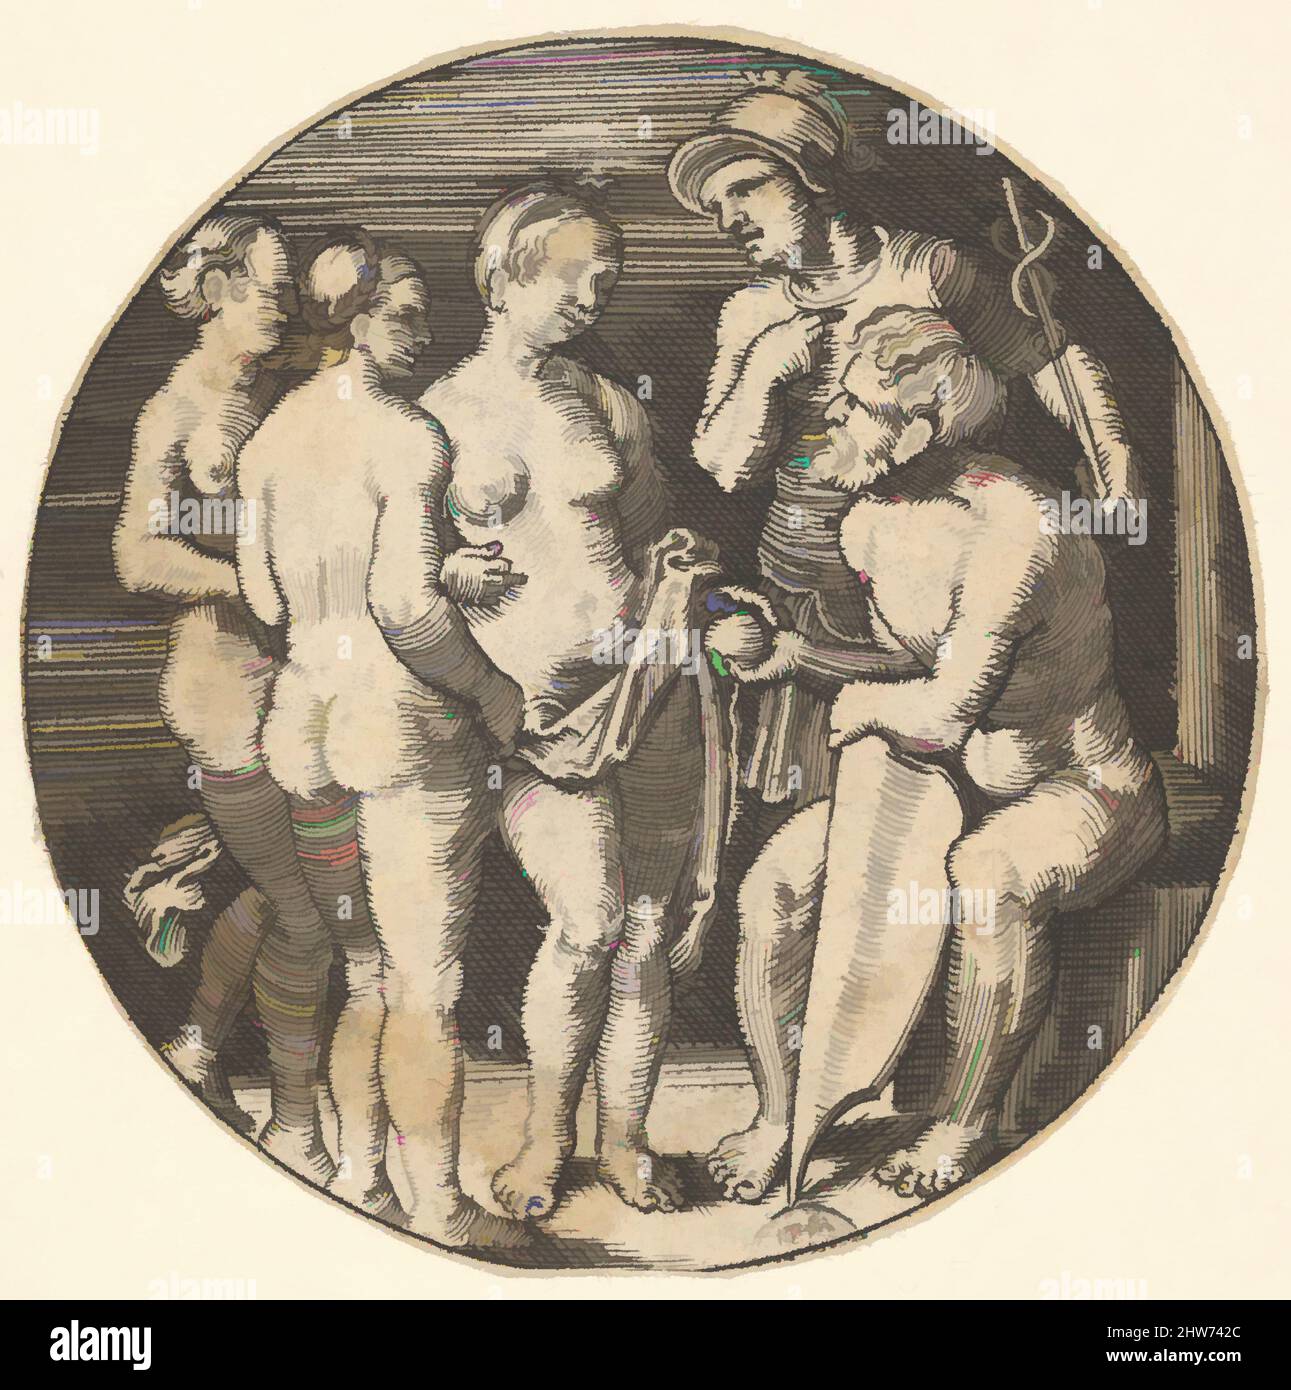 Art inspired by Judgment of Paris (copy), 16th century, Engraving, Prints, After Barthel Beham (German, Nuremberg ca. 1502–1540 Italy), ? Jacob Binck (German, Cologne 1494/1500–1569 Kaliningrad (Königsberg, Classic works modernized by Artotop with a splash of modernity. Shapes, color and value, eye-catching visual impact on art. Emotions through freedom of artworks in a contemporary way. A timeless message pursuing a wildly creative new direction. Artists turning to the digital medium and creating the Artotop NFT Stock Photo